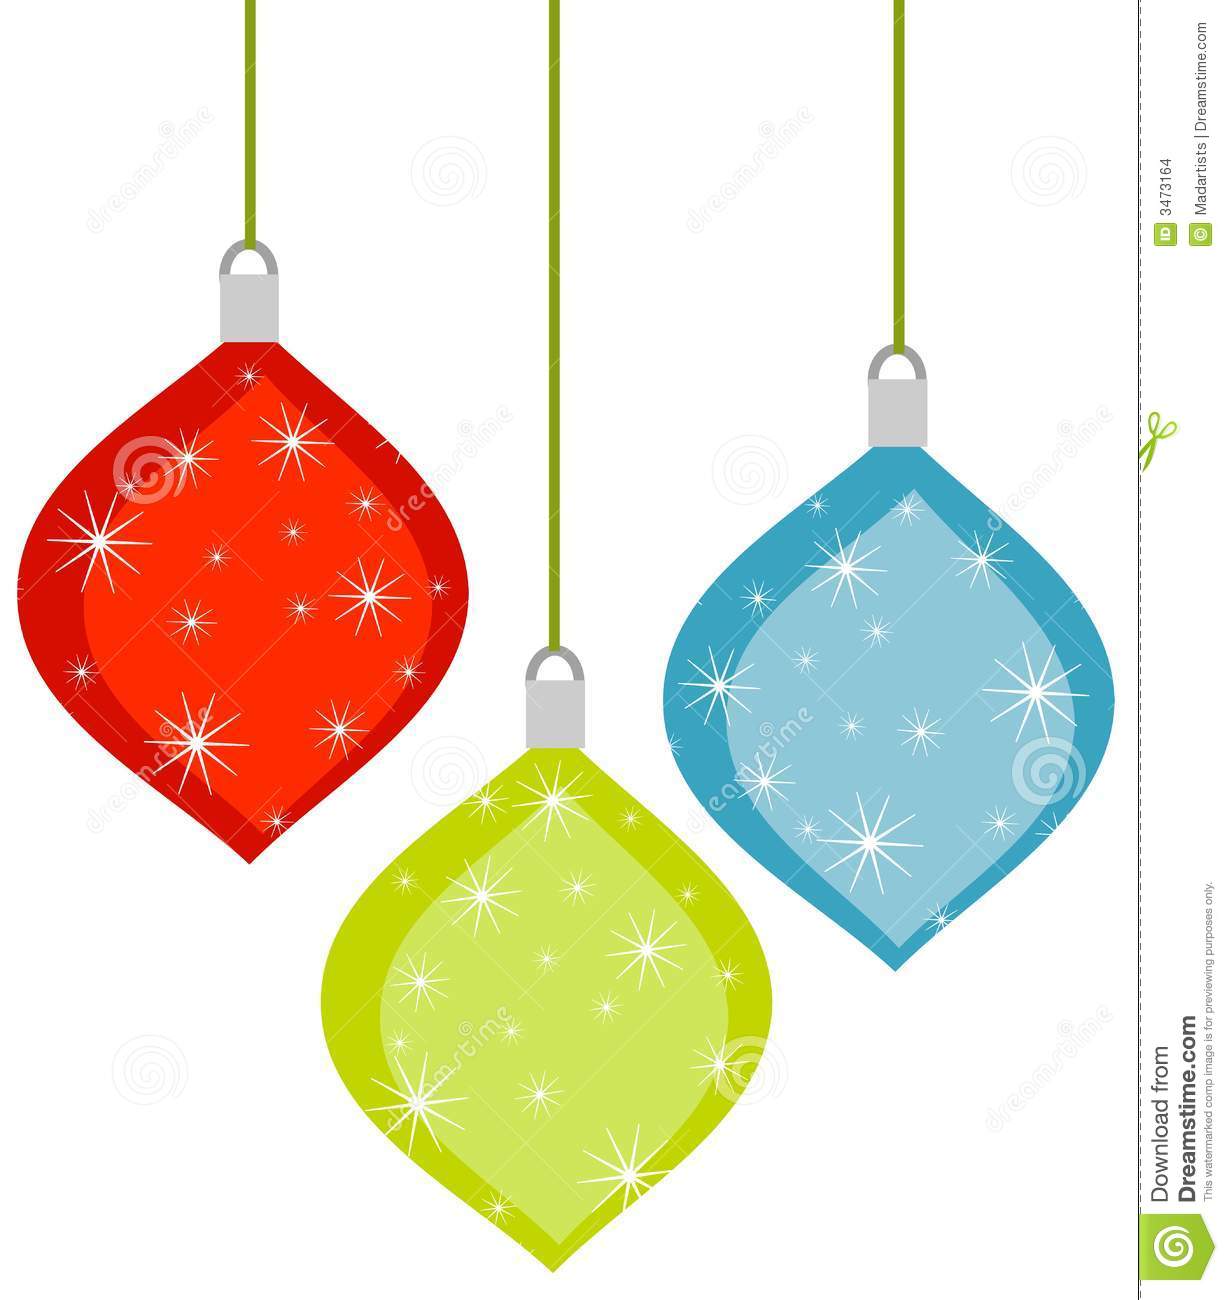 Use These Free Images For You - Christmas Ornaments Images Clip Art